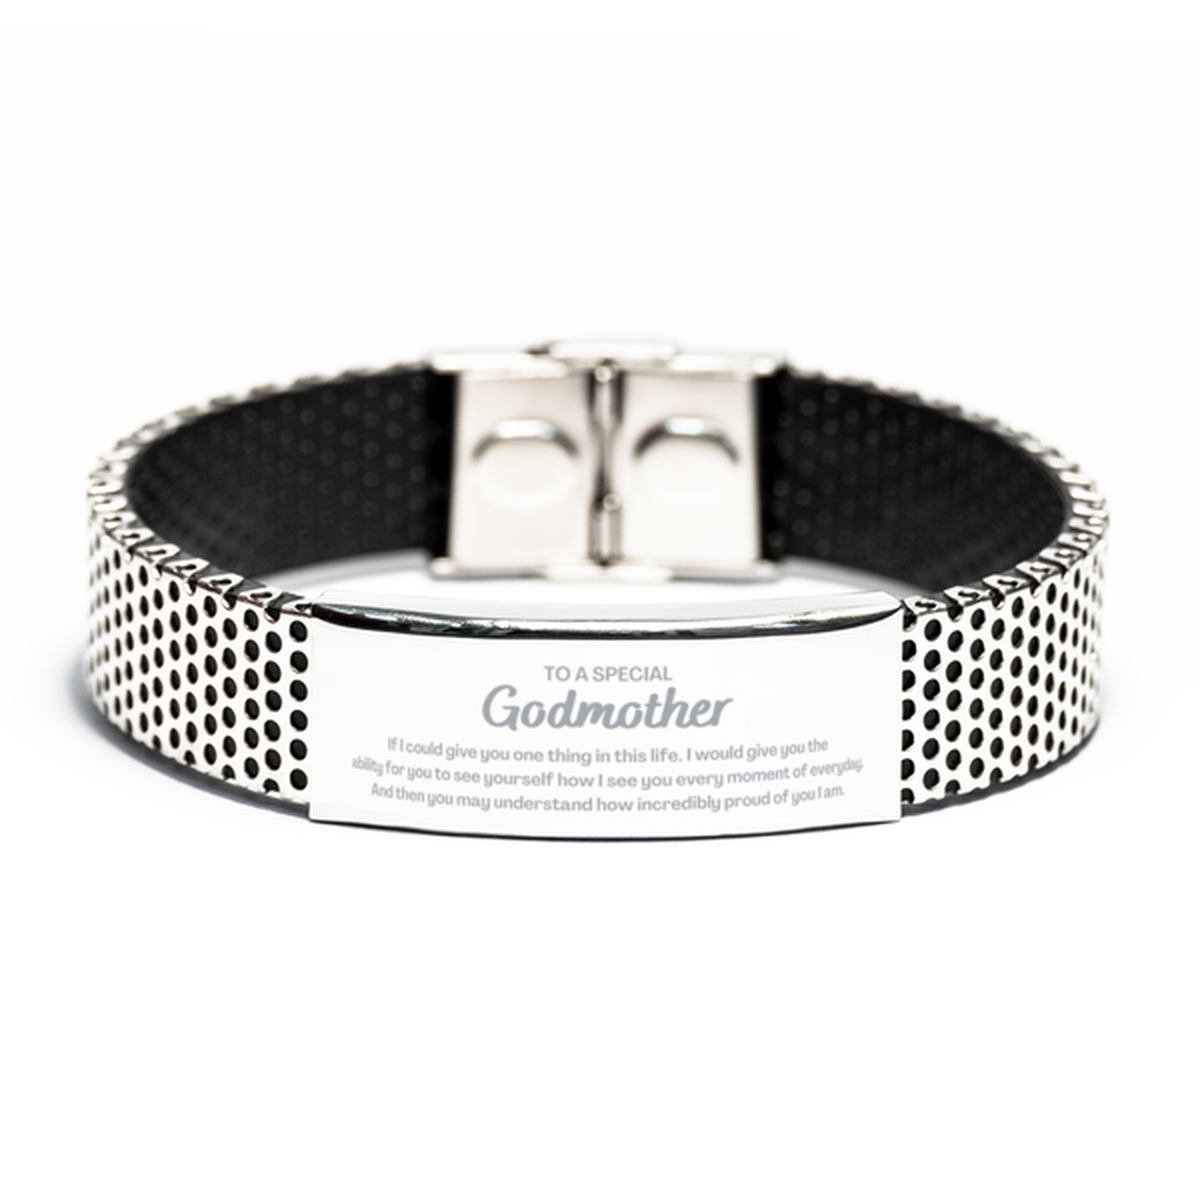 To My Godmother Stainless Steel Bracelet, Gifts For Godmother Engraved, Inspirational Gifts for Christmas Birthday, Epic Gifts for Godmother To A Special Godmother how incredibly proud of you I am